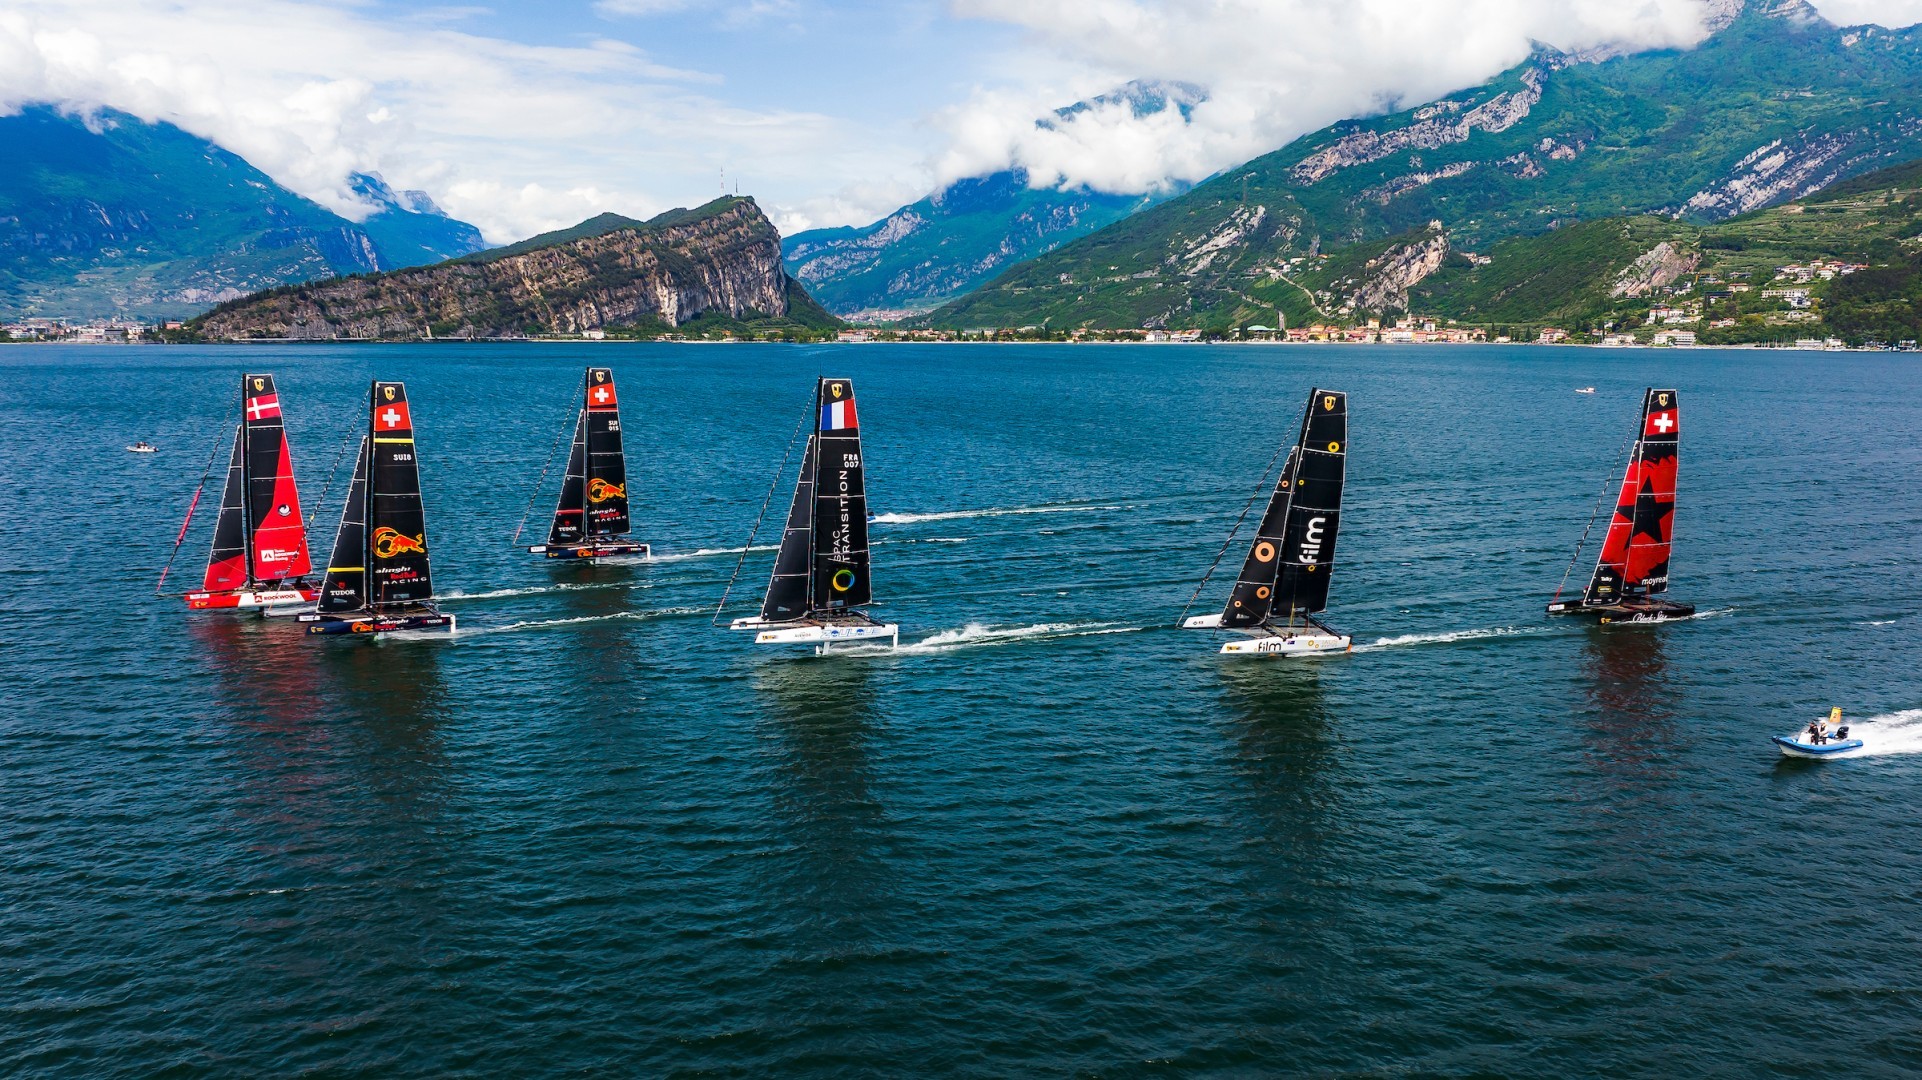 Practice racing today. Yacht racing backdrops don't come more dramatic than on Lake Garda